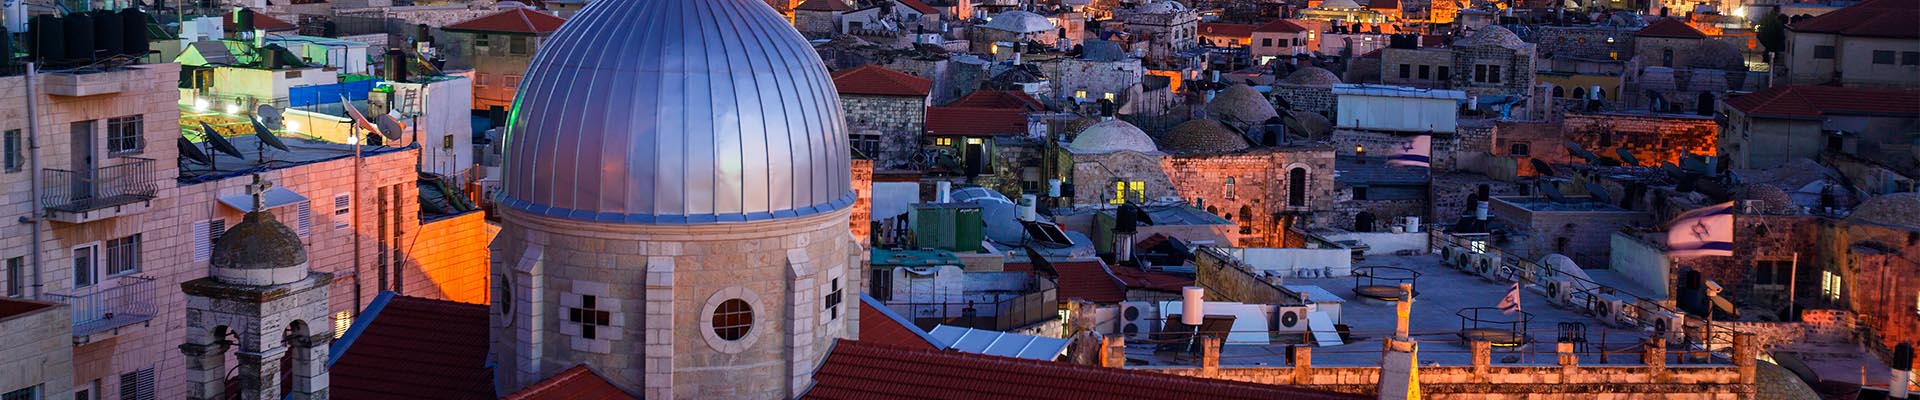 8 Day Private Christian Israel Tour